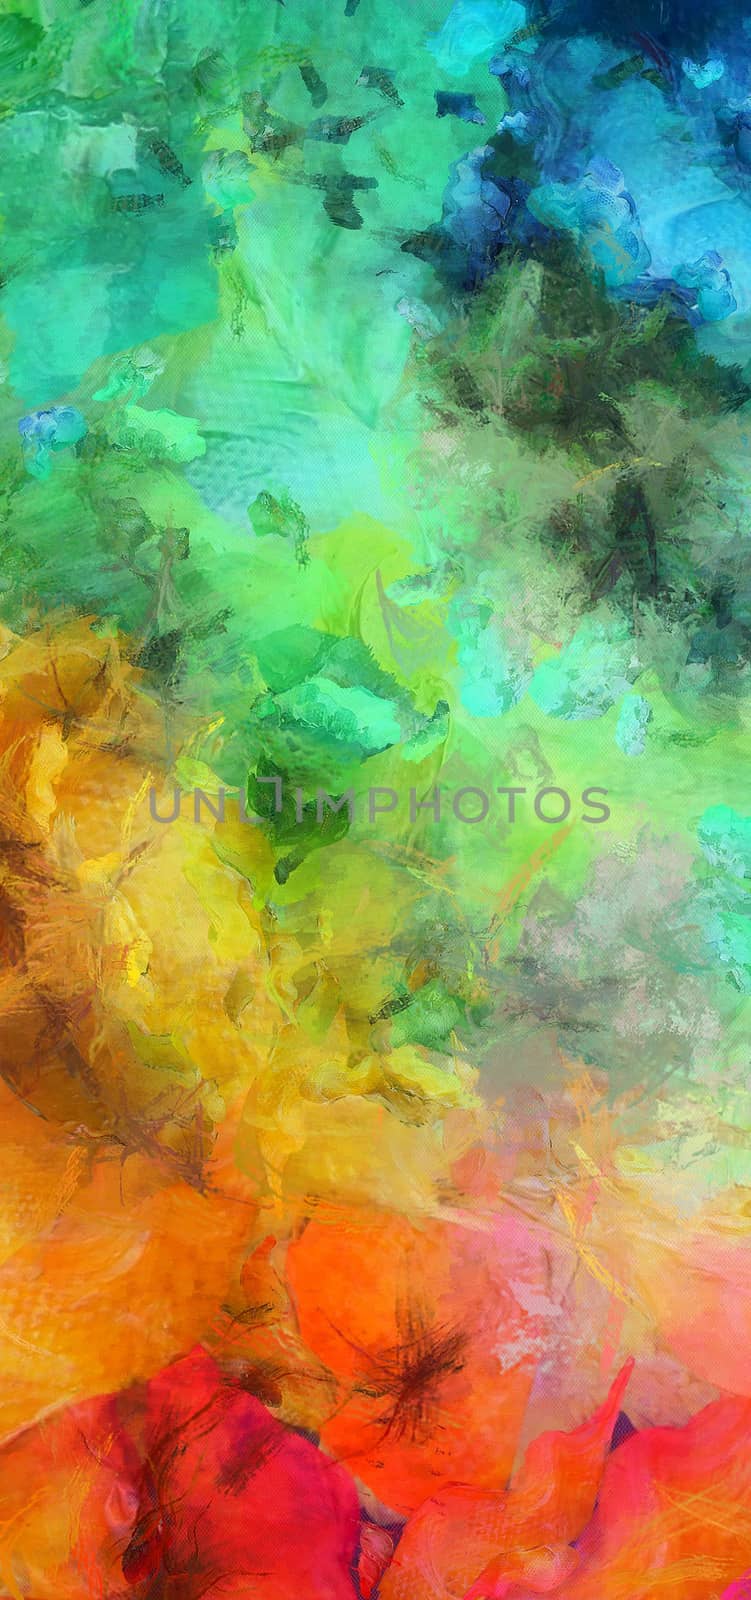 Bright Colorful Abstract Painting. Wide Brush strokes. 3D rendering